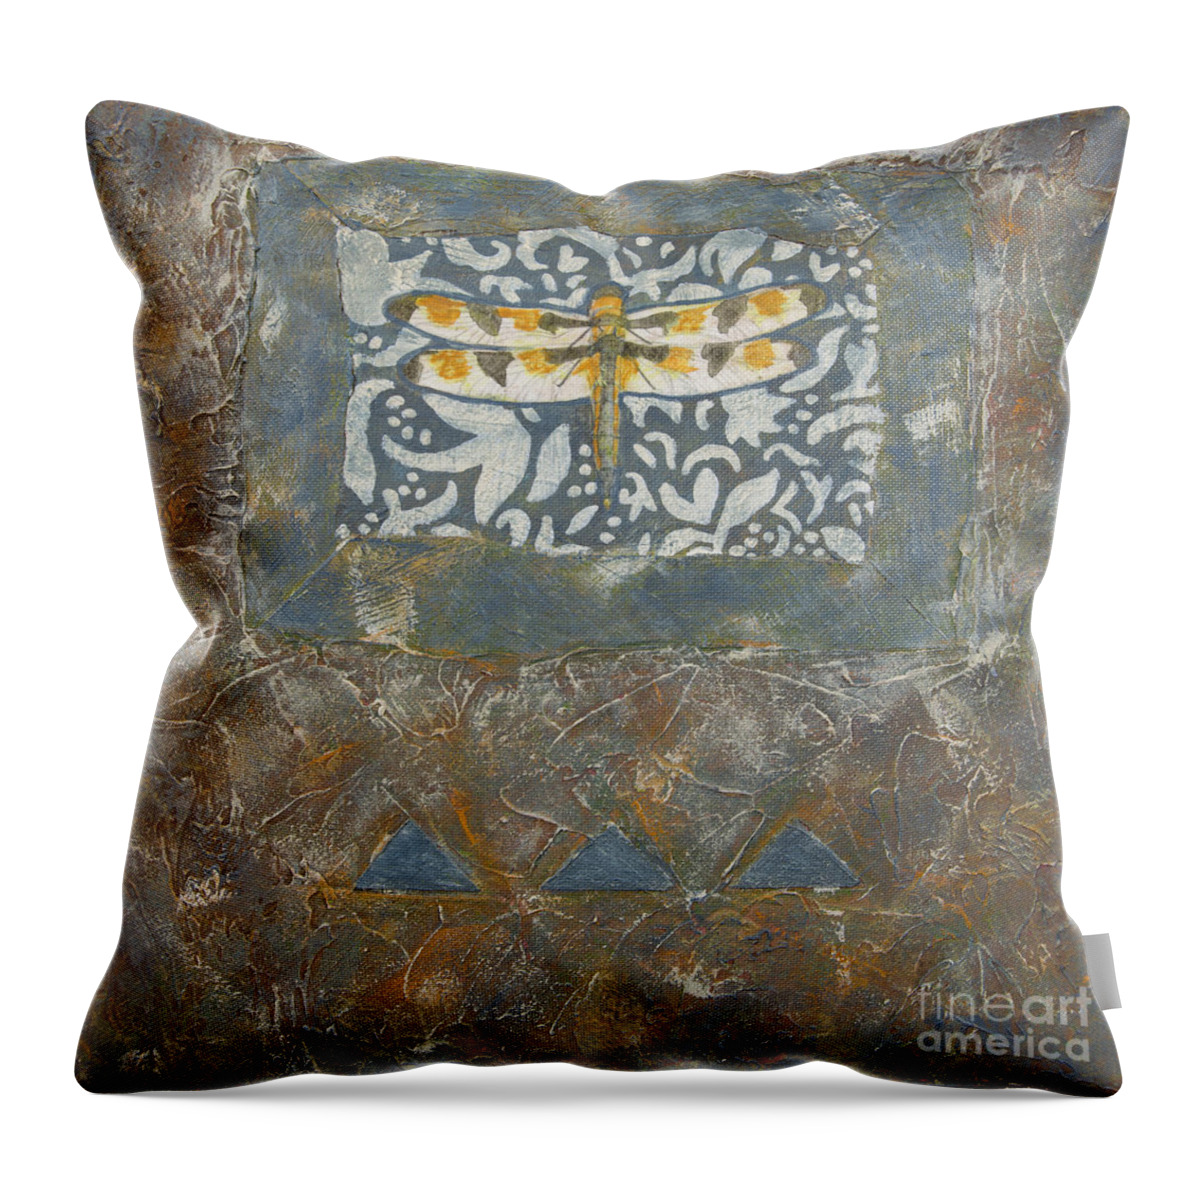 Dragonfly Throw Pillow featuring the painting Dragonfly by Sandra Neumann Wilderman